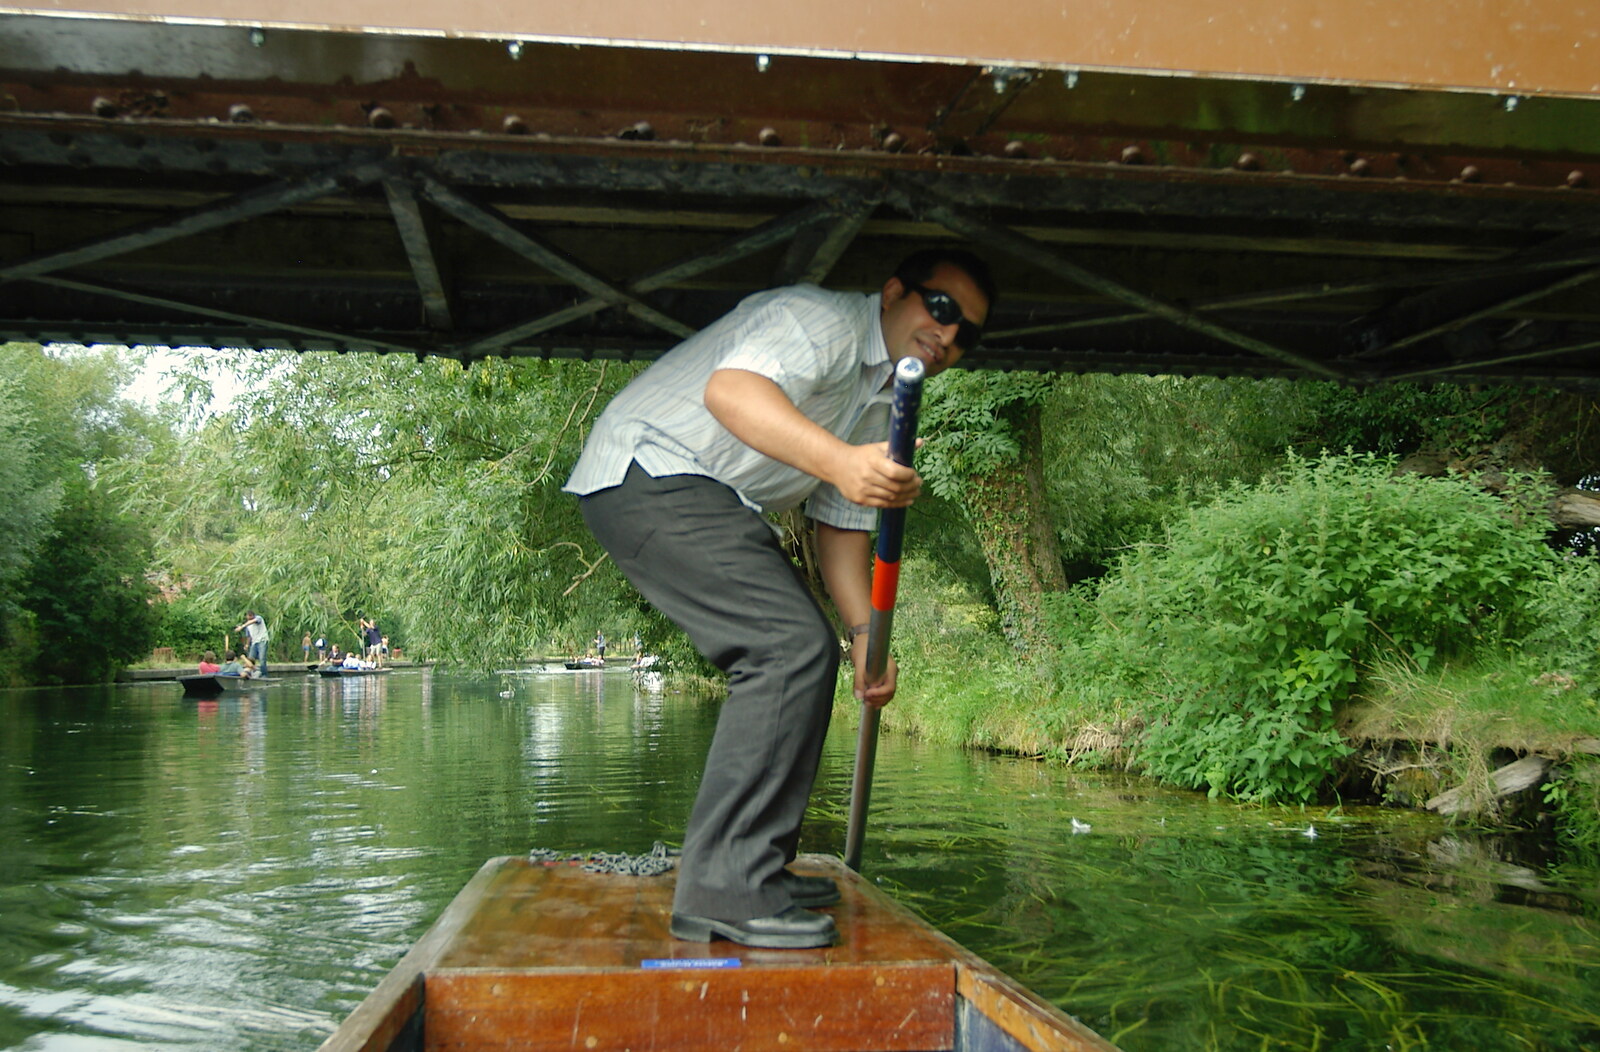 Anwar ducks from Qualcomm goes Punting on the Cam, Grantchester Meadows, Cambridge - 18th August 2005